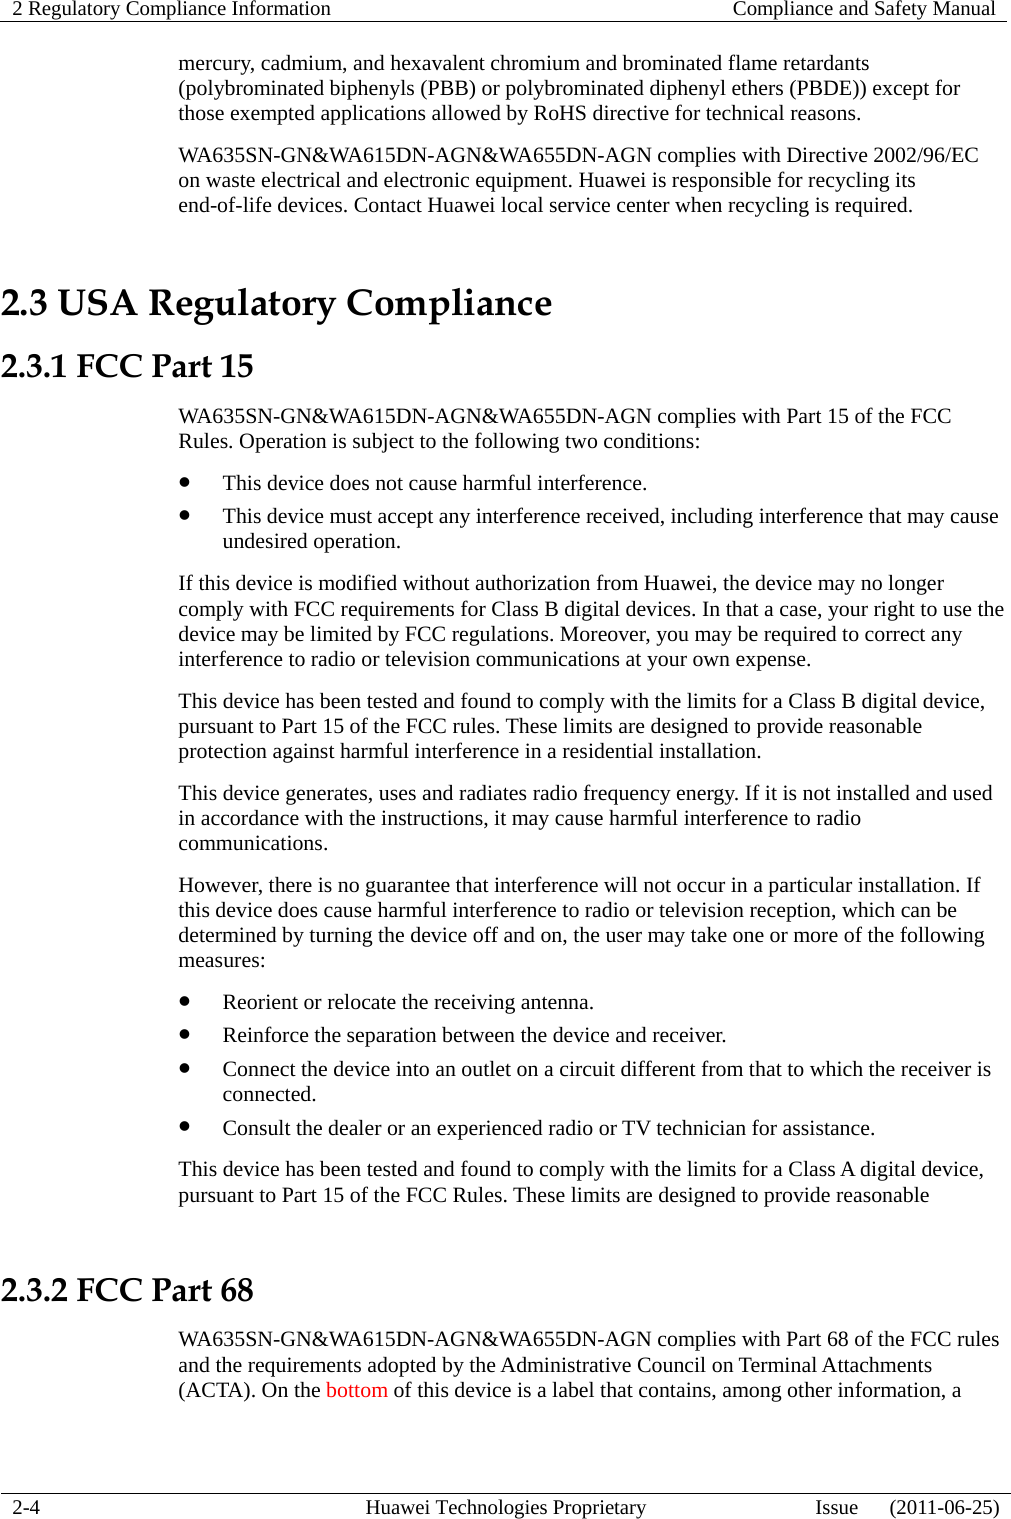 2 Regulatory Compliance Information   Compliance and Safety Manual  2-4  Huawei Technologies Proprietary  Issue      (2011-06-25) mercury, cadmium, and hexavalent chromium and brominated flame retardants (polybrominated biphenyls (PBB) or polybrominated diphenyl ethers (PBDE)) except for those exempted applications allowed by RoHS directive for technical reasons. WA635SN-GN&amp;WA615DN-AGN&amp;WA655DN-AGN complies with Directive 2002/96/EC on waste electrical and electronic equipment. Huawei is responsible for recycling its end-of-life devices. Contact Huawei local service center when recycling is required. 2.3 USA Regulatory Compliance 2.3.1 FCC Part 15 WA635SN-GN&amp;WA615DN-AGN&amp;WA655DN-AGN complies with Part 15 of the FCC Rules. Operation is subject to the following two conditions: z This device does not cause harmful interference. z This device must accept any interference received, including interference that may cause undesired operation. If this device is modified without authorization from Huawei, the device may no longer comply with FCC requirements for Class B digital devices. In that a case, your right to use the device may be limited by FCC regulations. Moreover, you may be required to correct any interference to radio or television communications at your own expense. This device has been tested and found to comply with the limits for a Class B digital device, pursuant to Part 15 of the FCC rules. These limits are designed to provide reasonable protection against harmful interference in a residential installation. This device generates, uses and radiates radio frequency energy. If it is not installed and used in accordance with the instructions, it may cause harmful interference to radio communications. However, there is no guarantee that interference will not occur in a particular installation. If this device does cause harmful interference to radio or television reception, which can be determined by turning the device off and on, the user may take one or more of the following measures: z Reorient or relocate the receiving antenna. z Reinforce the separation between the device and receiver. z Connect the device into an outlet on a circuit different from that to which the receiver is connected. z Consult the dealer or an experienced radio or TV technician for assistance. This device has been tested and found to comply with the limits for a Class A digital device, pursuant to Part 15 of the FCC Rules. These limits are designed to provide reasonable    2.3.2 FCC Part 68 WA635SN-GN&amp;WA615DN-AGN&amp;WA655DN-AGN complies with Part 68 of the FCC rules and the requirements adopted by the Administrative Council on Terminal Attachments (ACTA). On the bottom of this device is a label that contains, among other information, a 